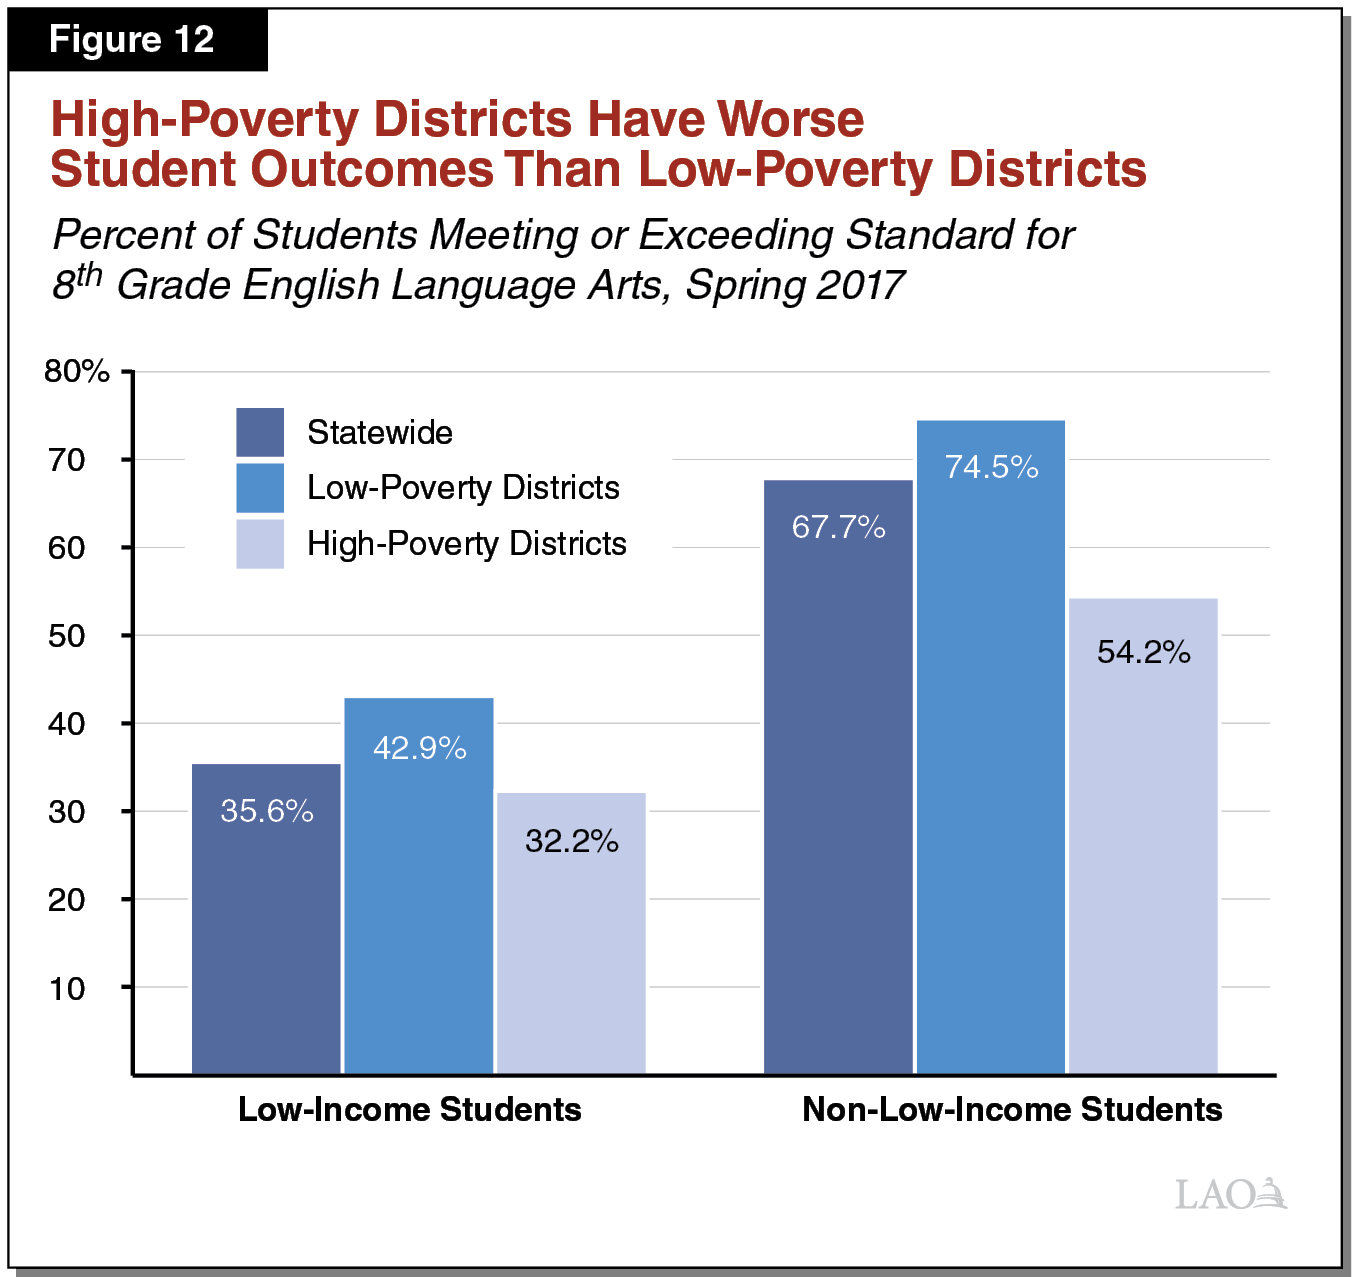 Figure 12 - High-Poverty Districts Have Worse Student Outcomes Than Low-Poverty Districts